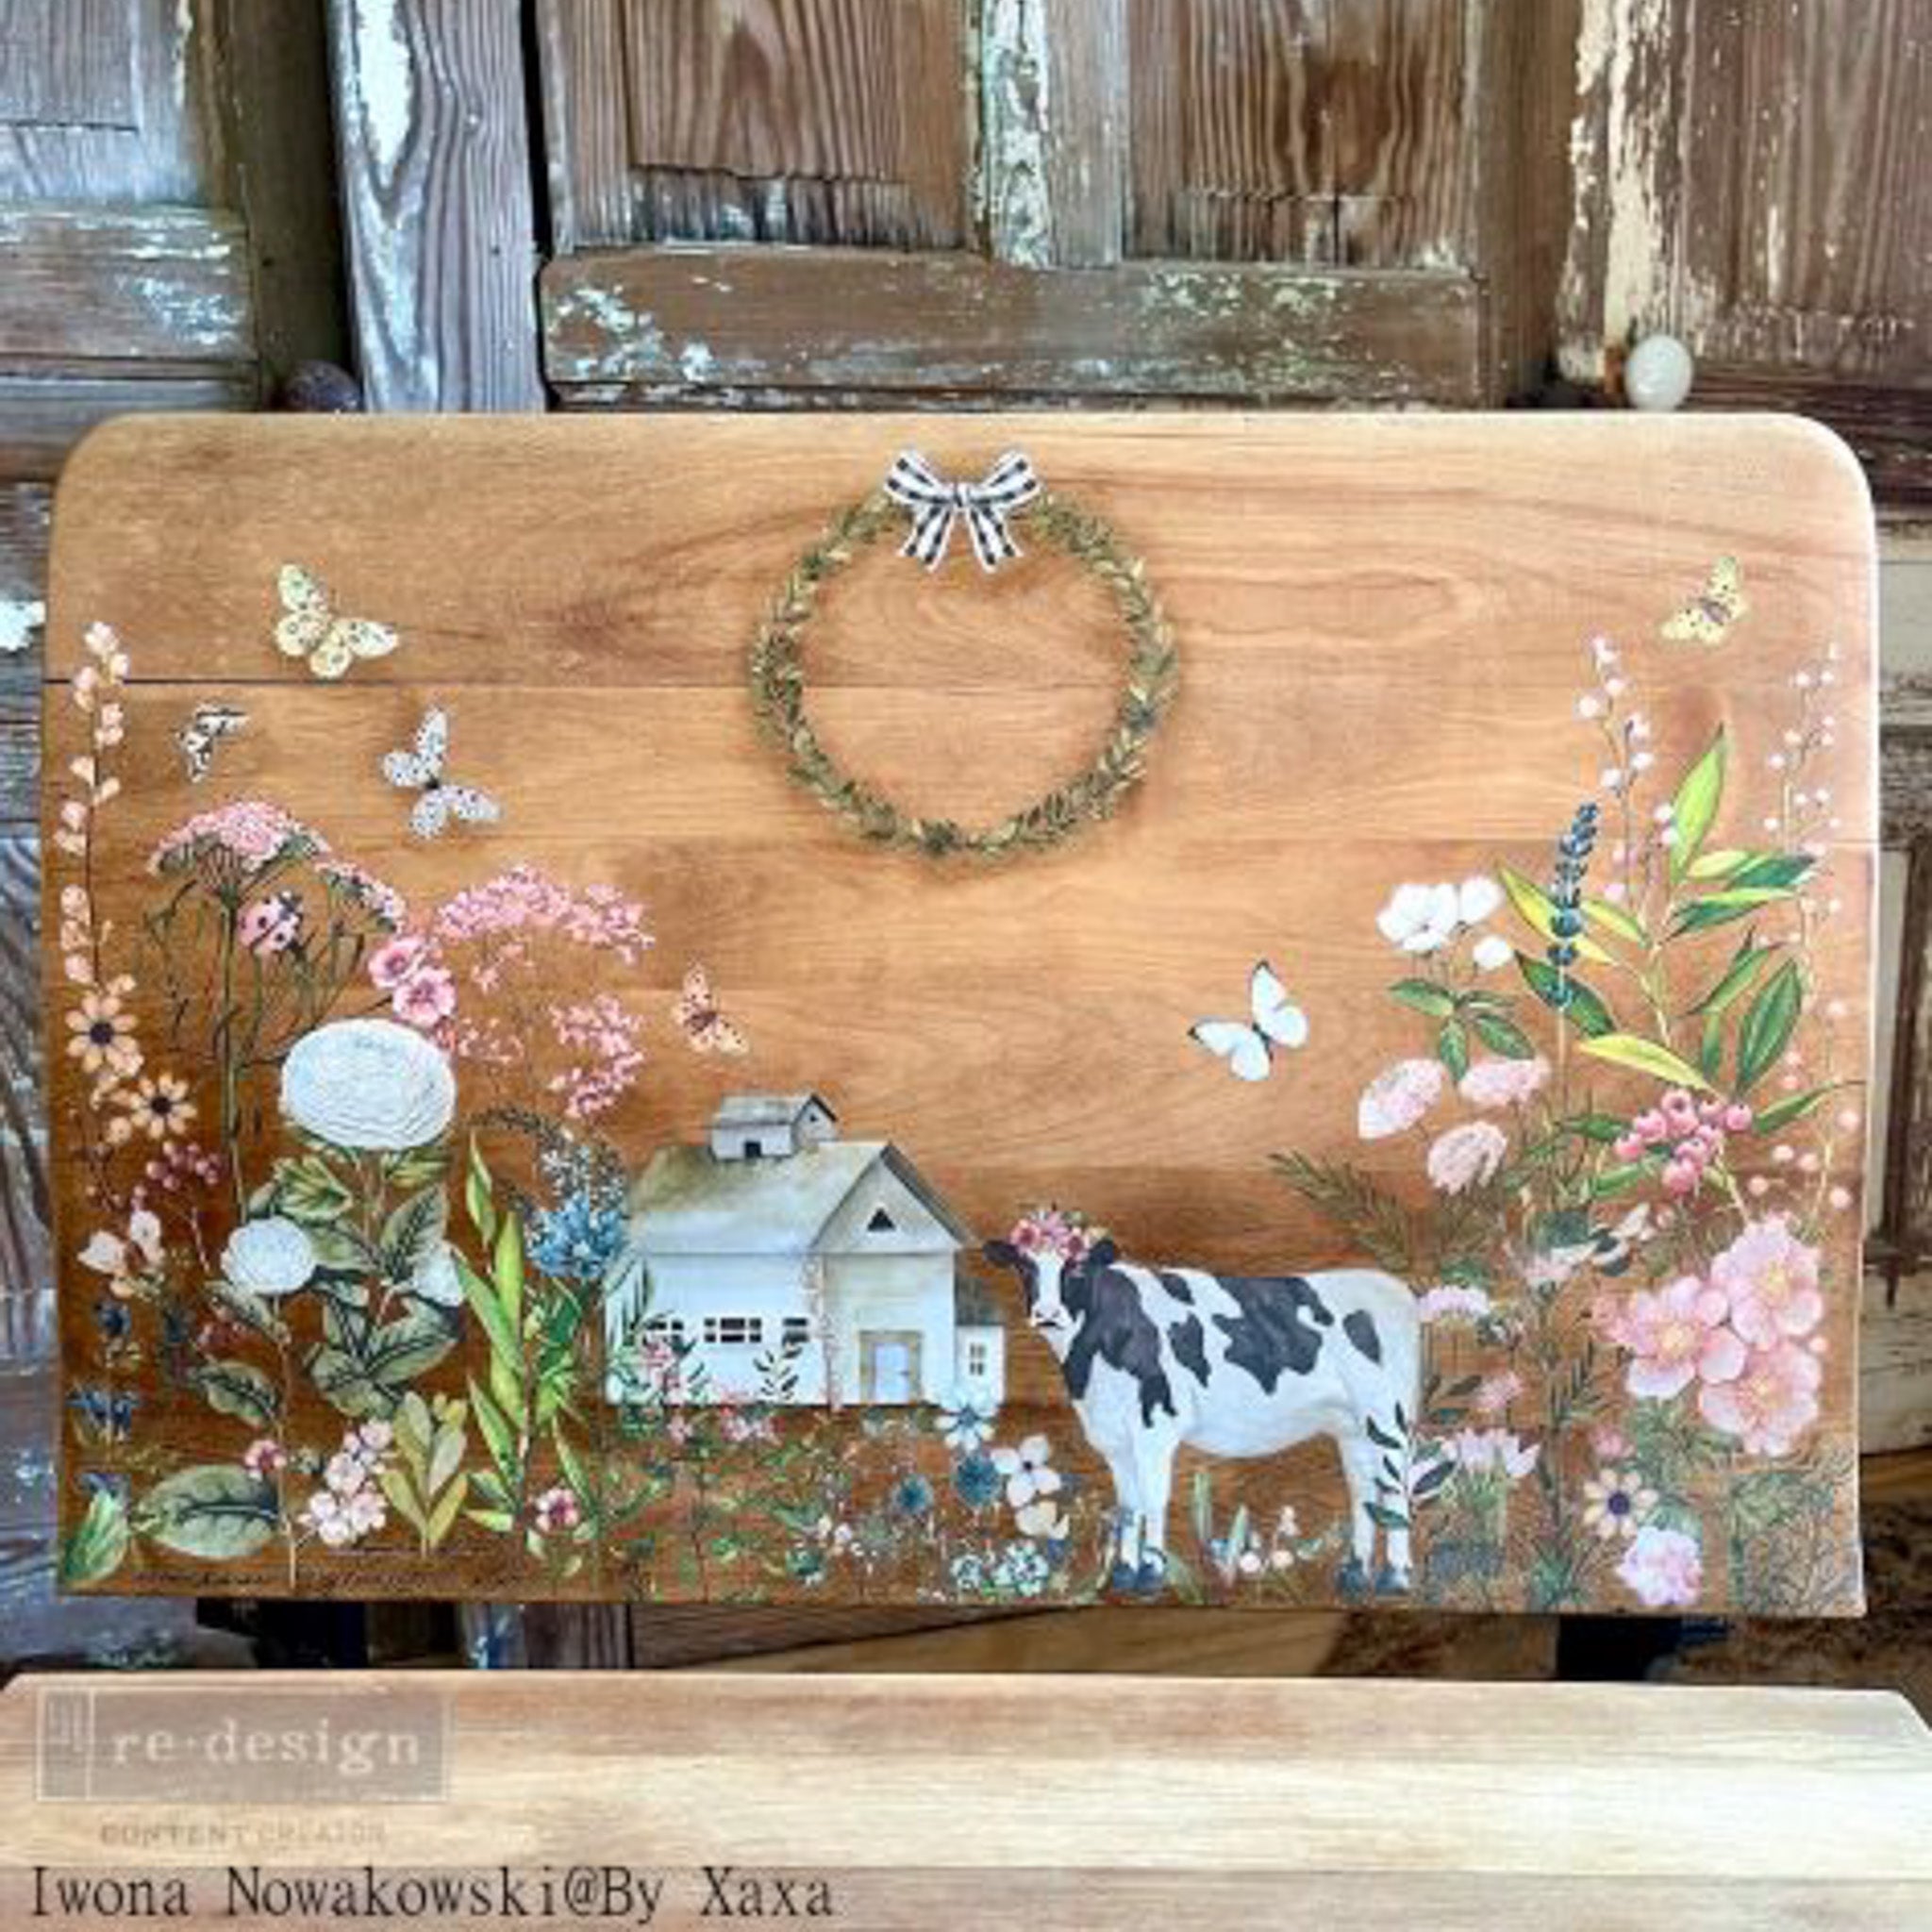 A wood TV tray refurbished by Iwona Nowakowski @ By Xaxa is stained a natural wood color and features the Home & Farm small transfer on it.